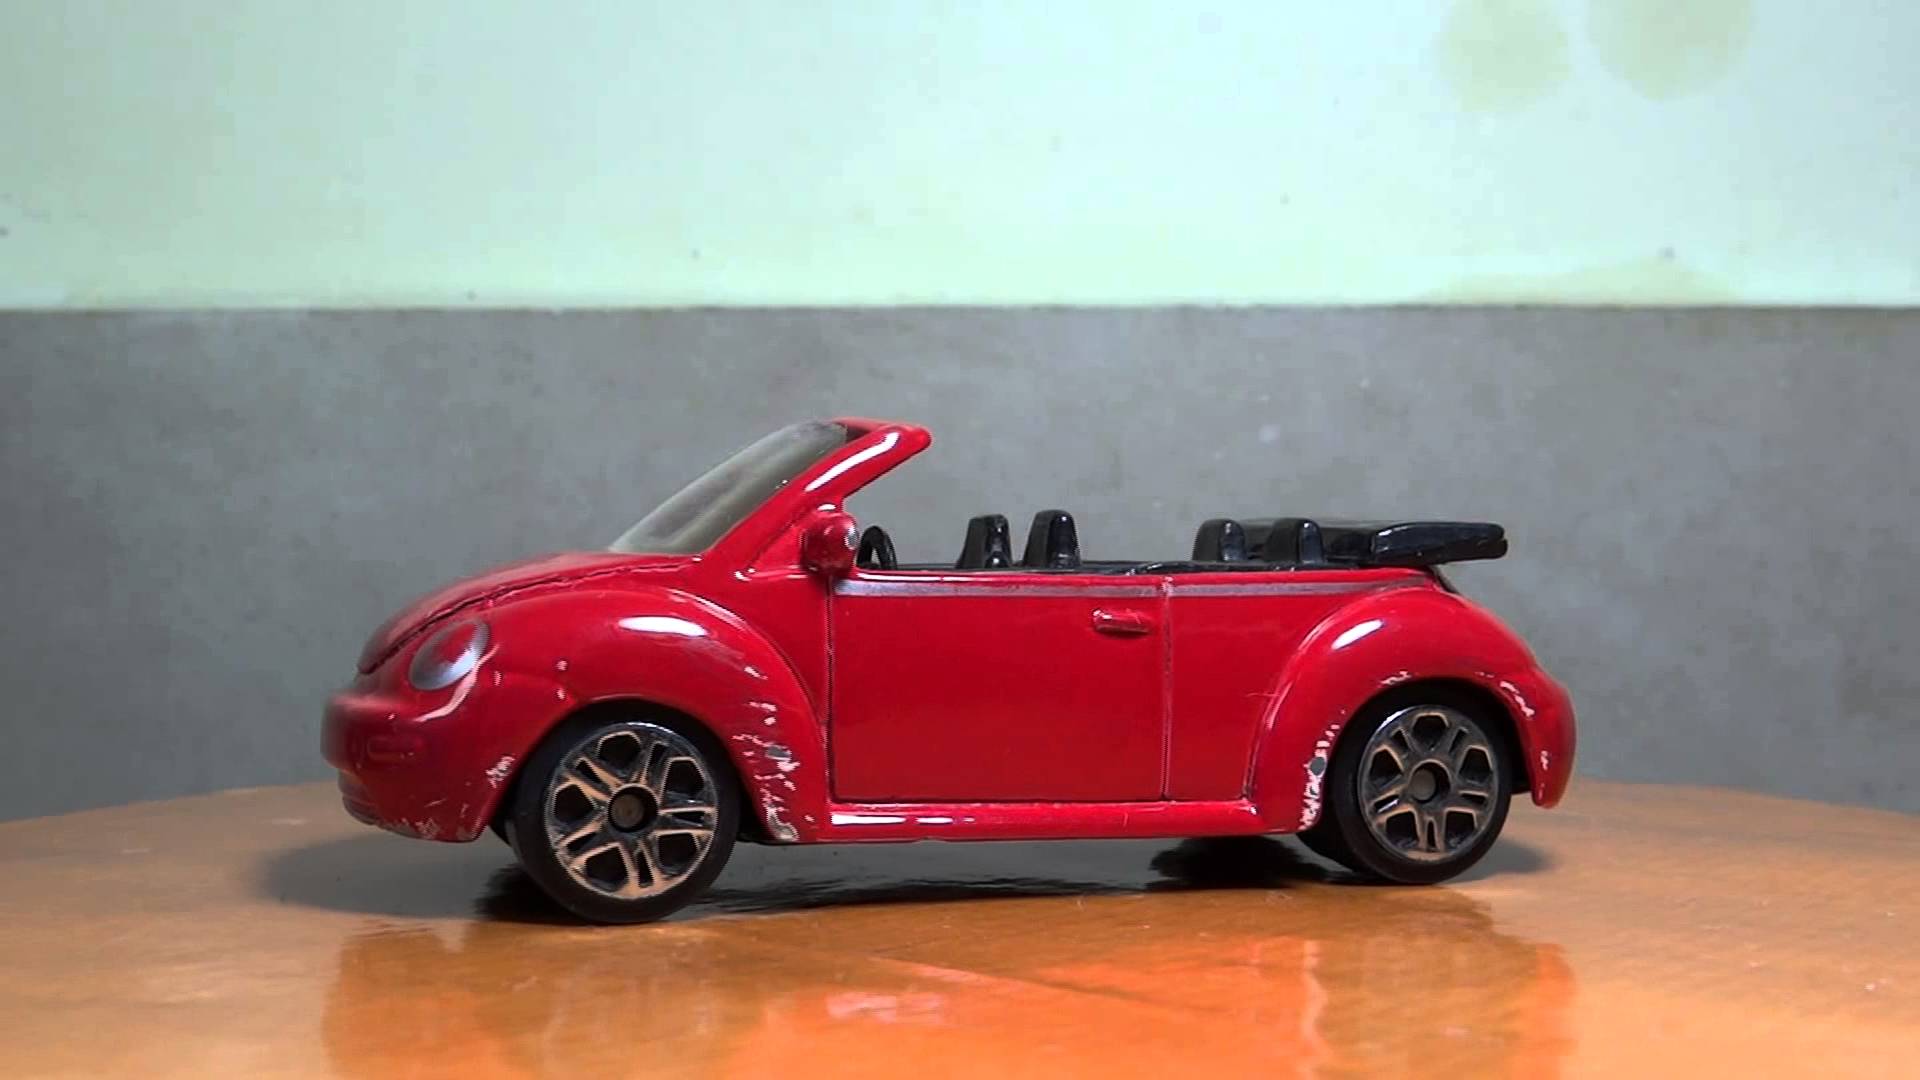 Red Volkswagen Toy Car - YouTube